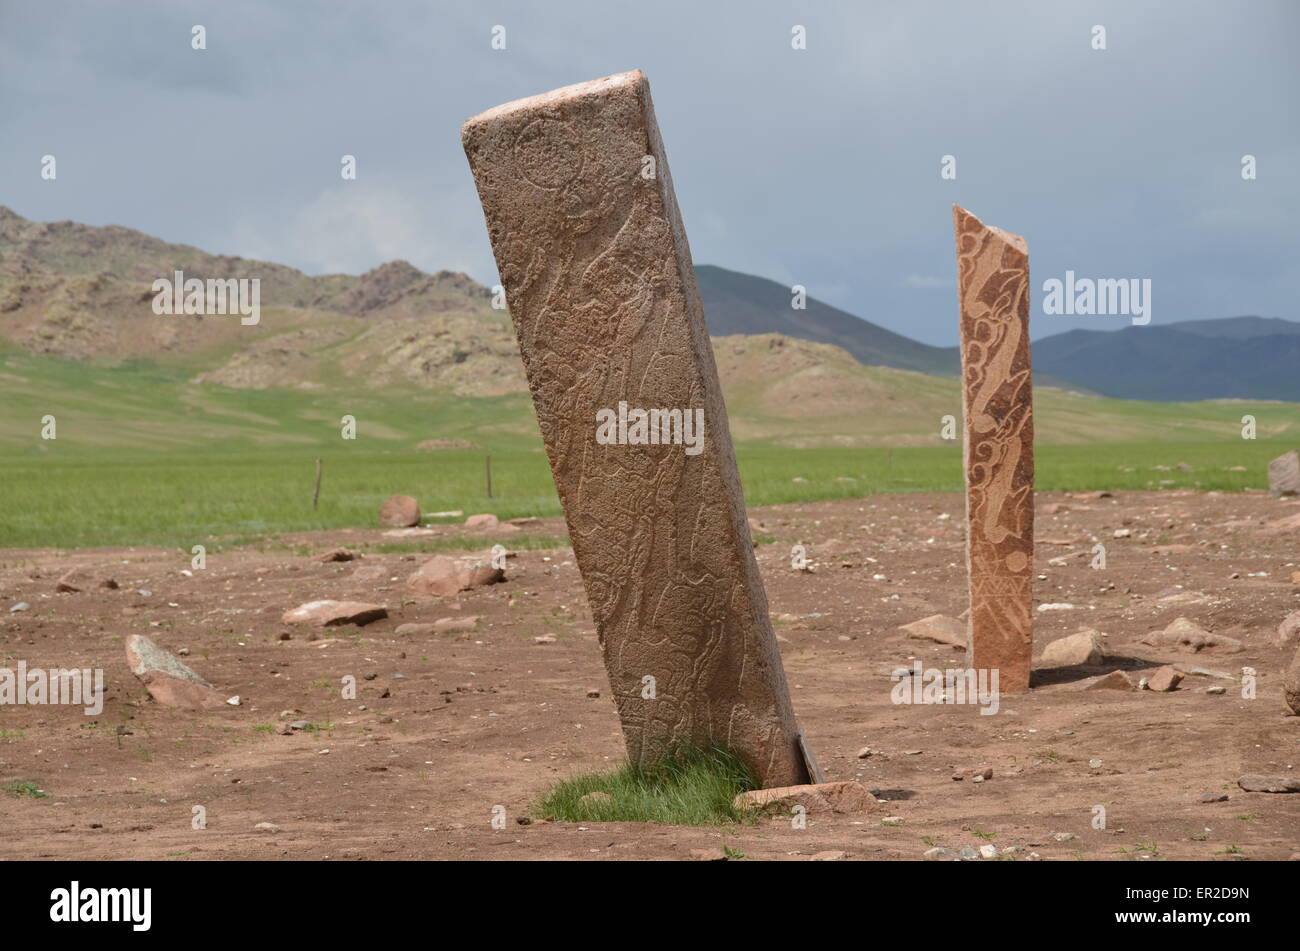 Deer stones near the city of Moron, Ovsgol province, northern Mongolia. Stock Photo